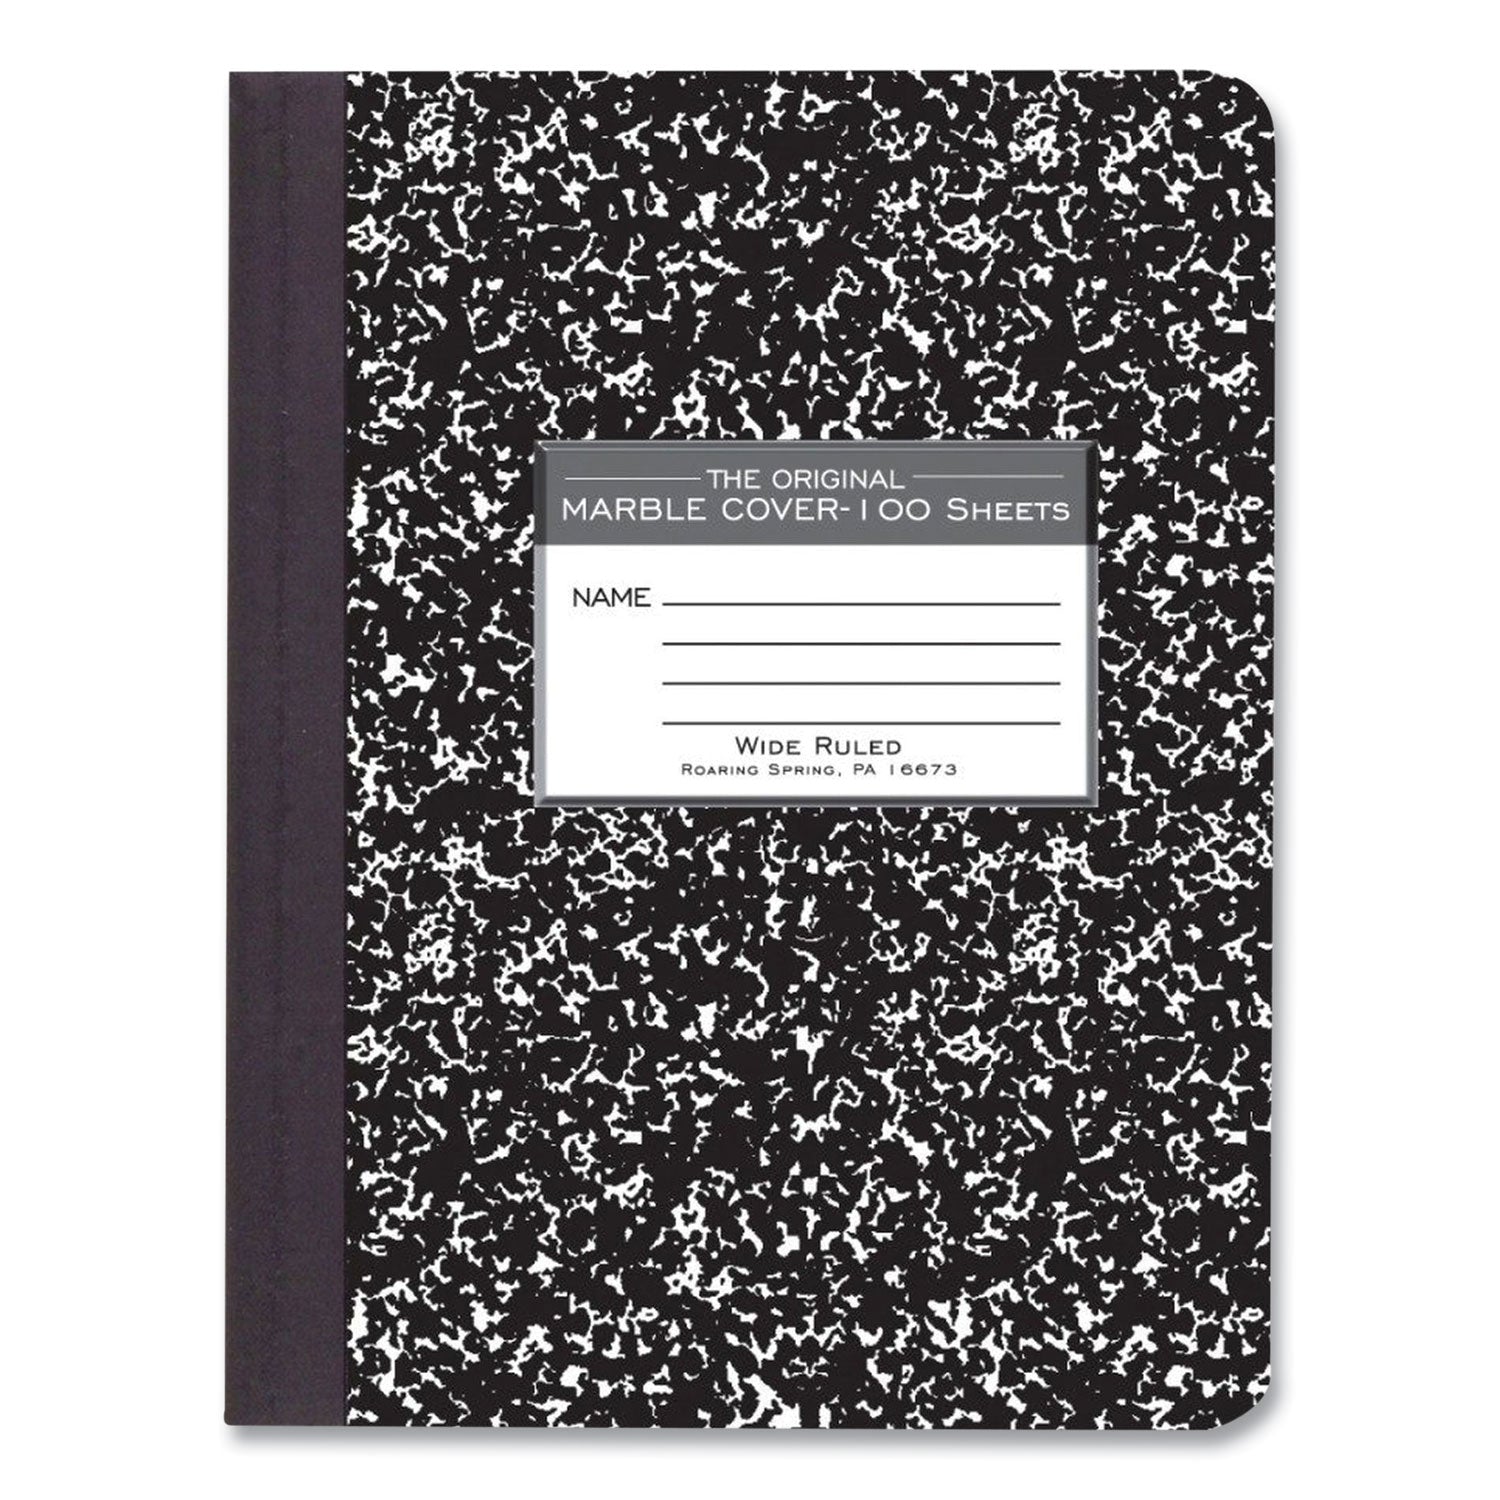 hardcover-marble-composition-book-wide-legal-rule-black-marble-cover-100-975-x-75-sheet-12-ct-ships-in-4-6-bus-days_roa77231cs - 2